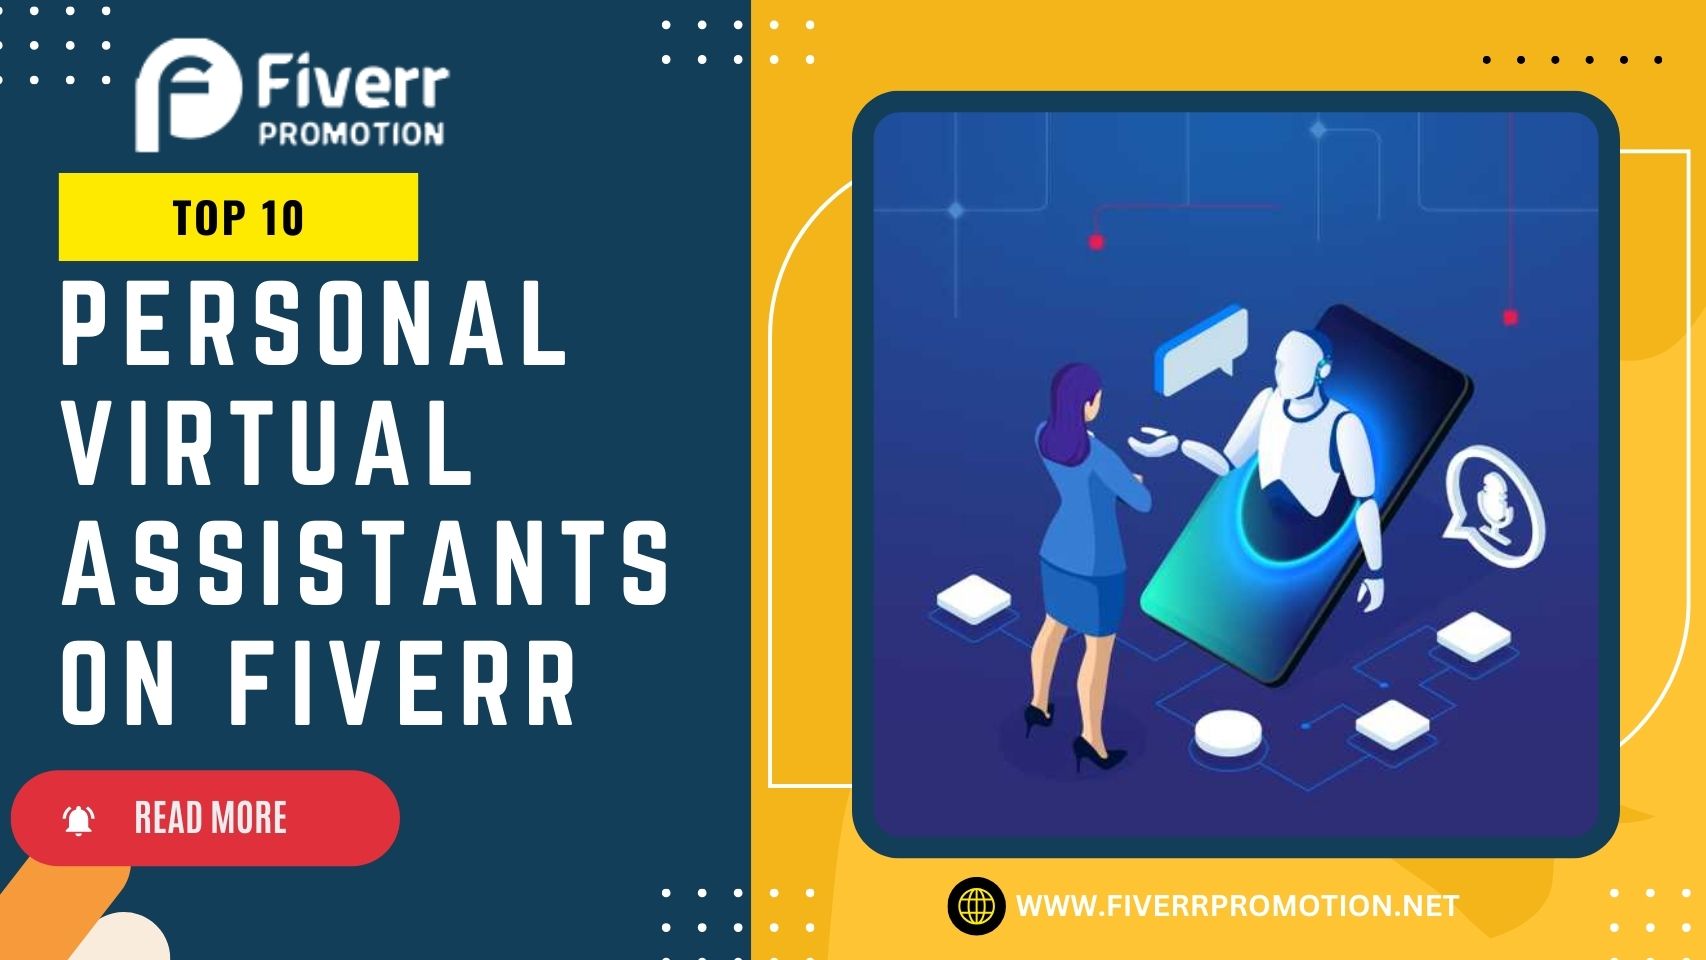 Top 10 Personal Virtual Assistants on Fiverr